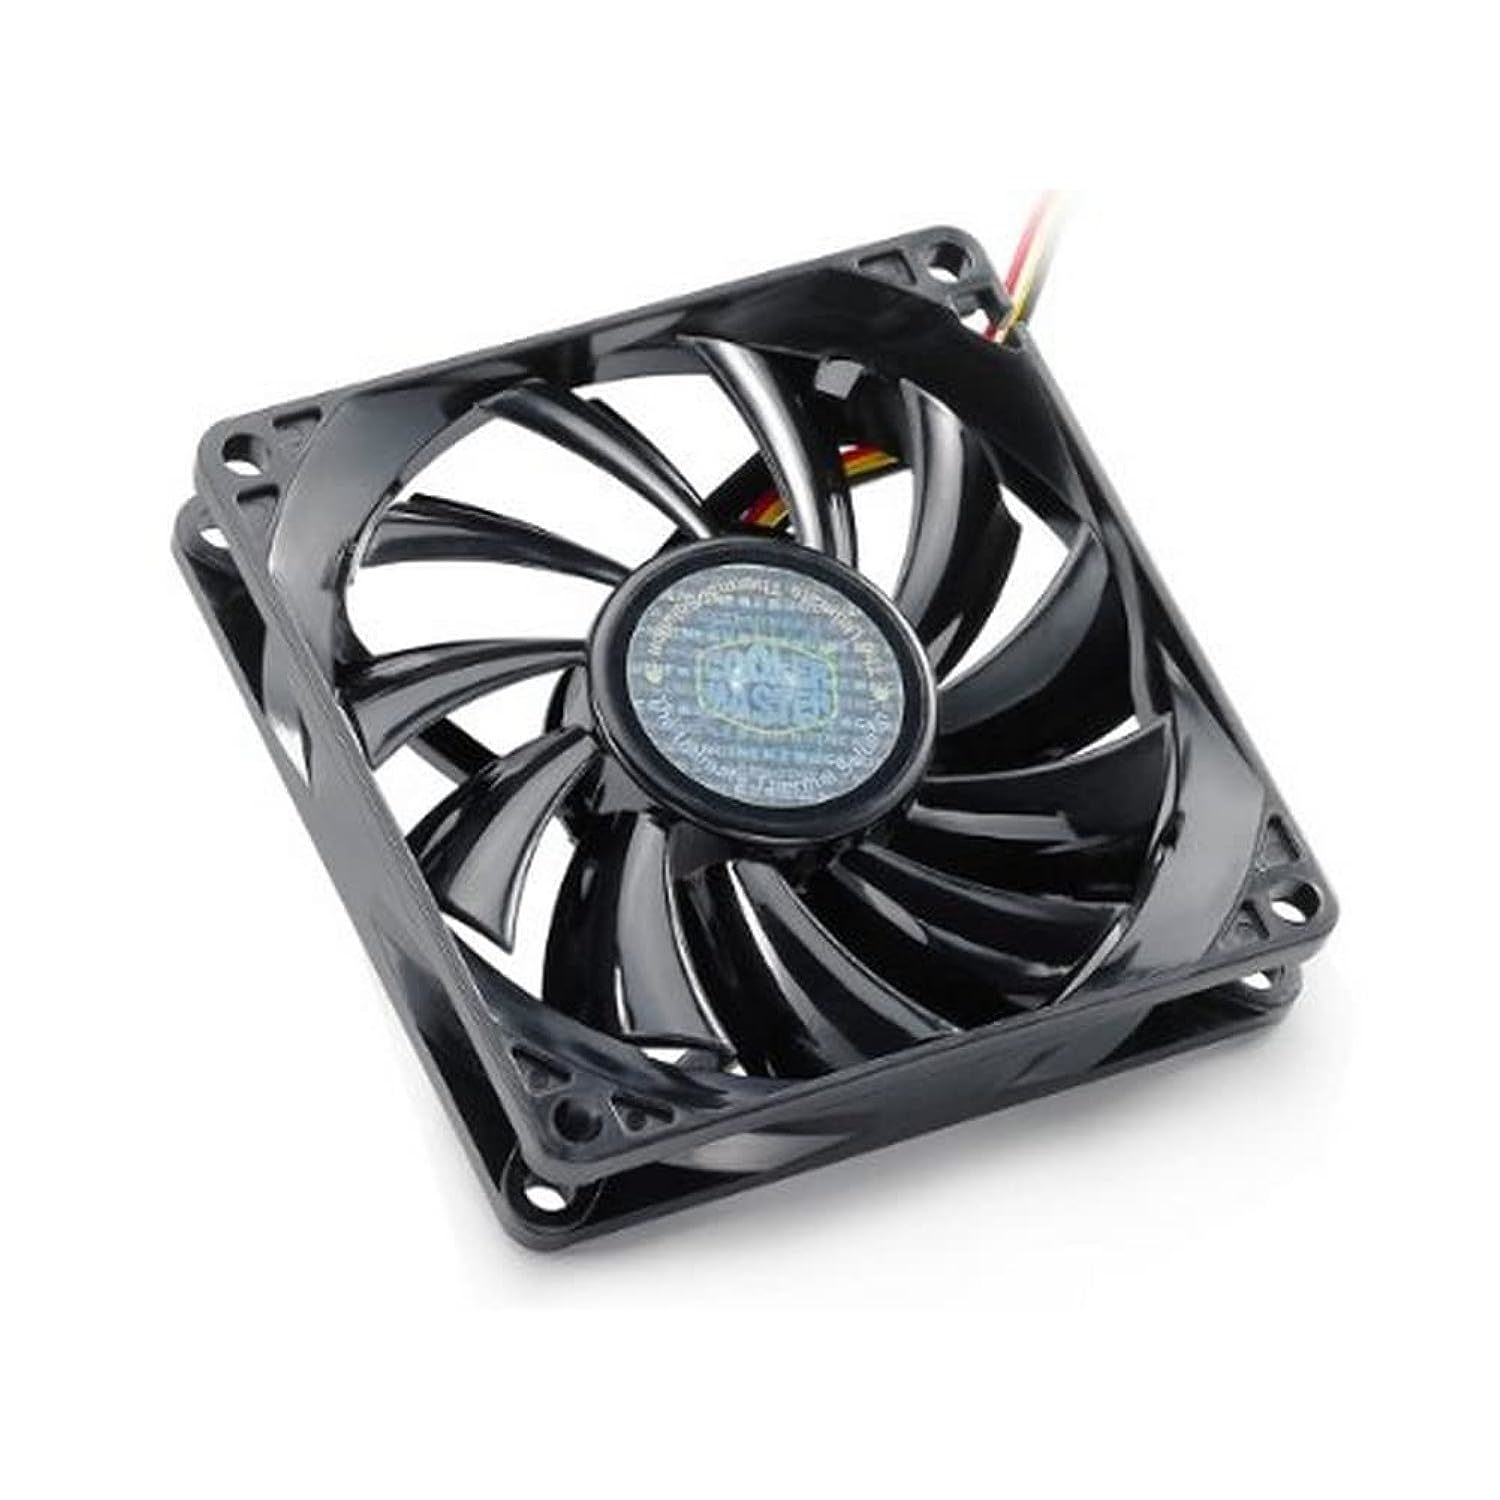 Cooler Master Sleeve Bearing 80mm Silent Fan for Computer Cases and CPU Coolers - $19.99